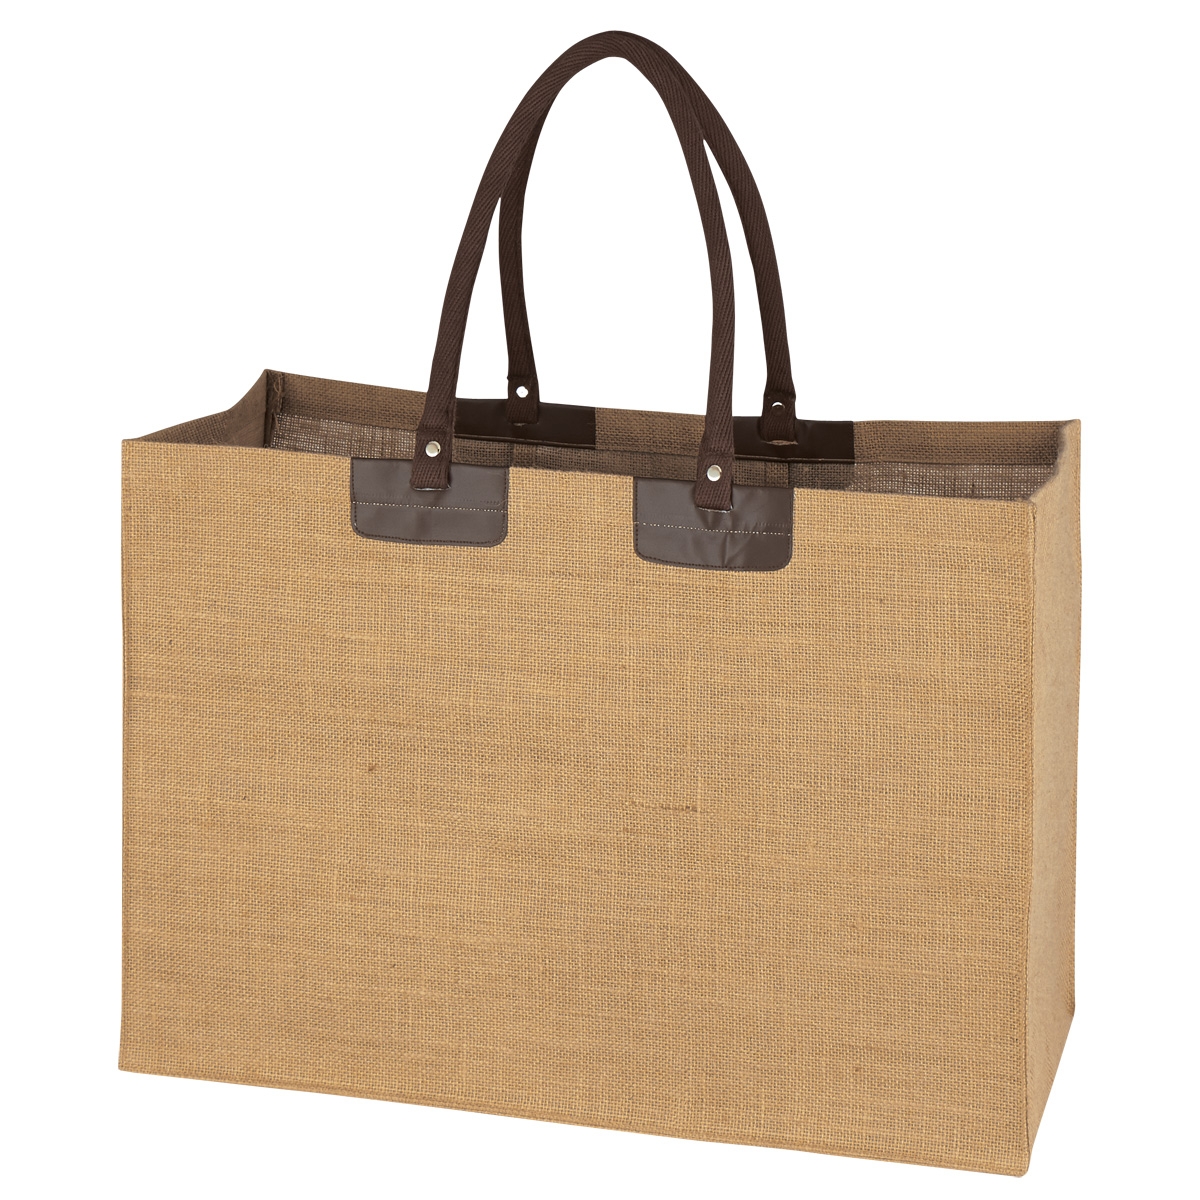 #3620 Jumbo Jute Tote Bag - Hit Promotional Products